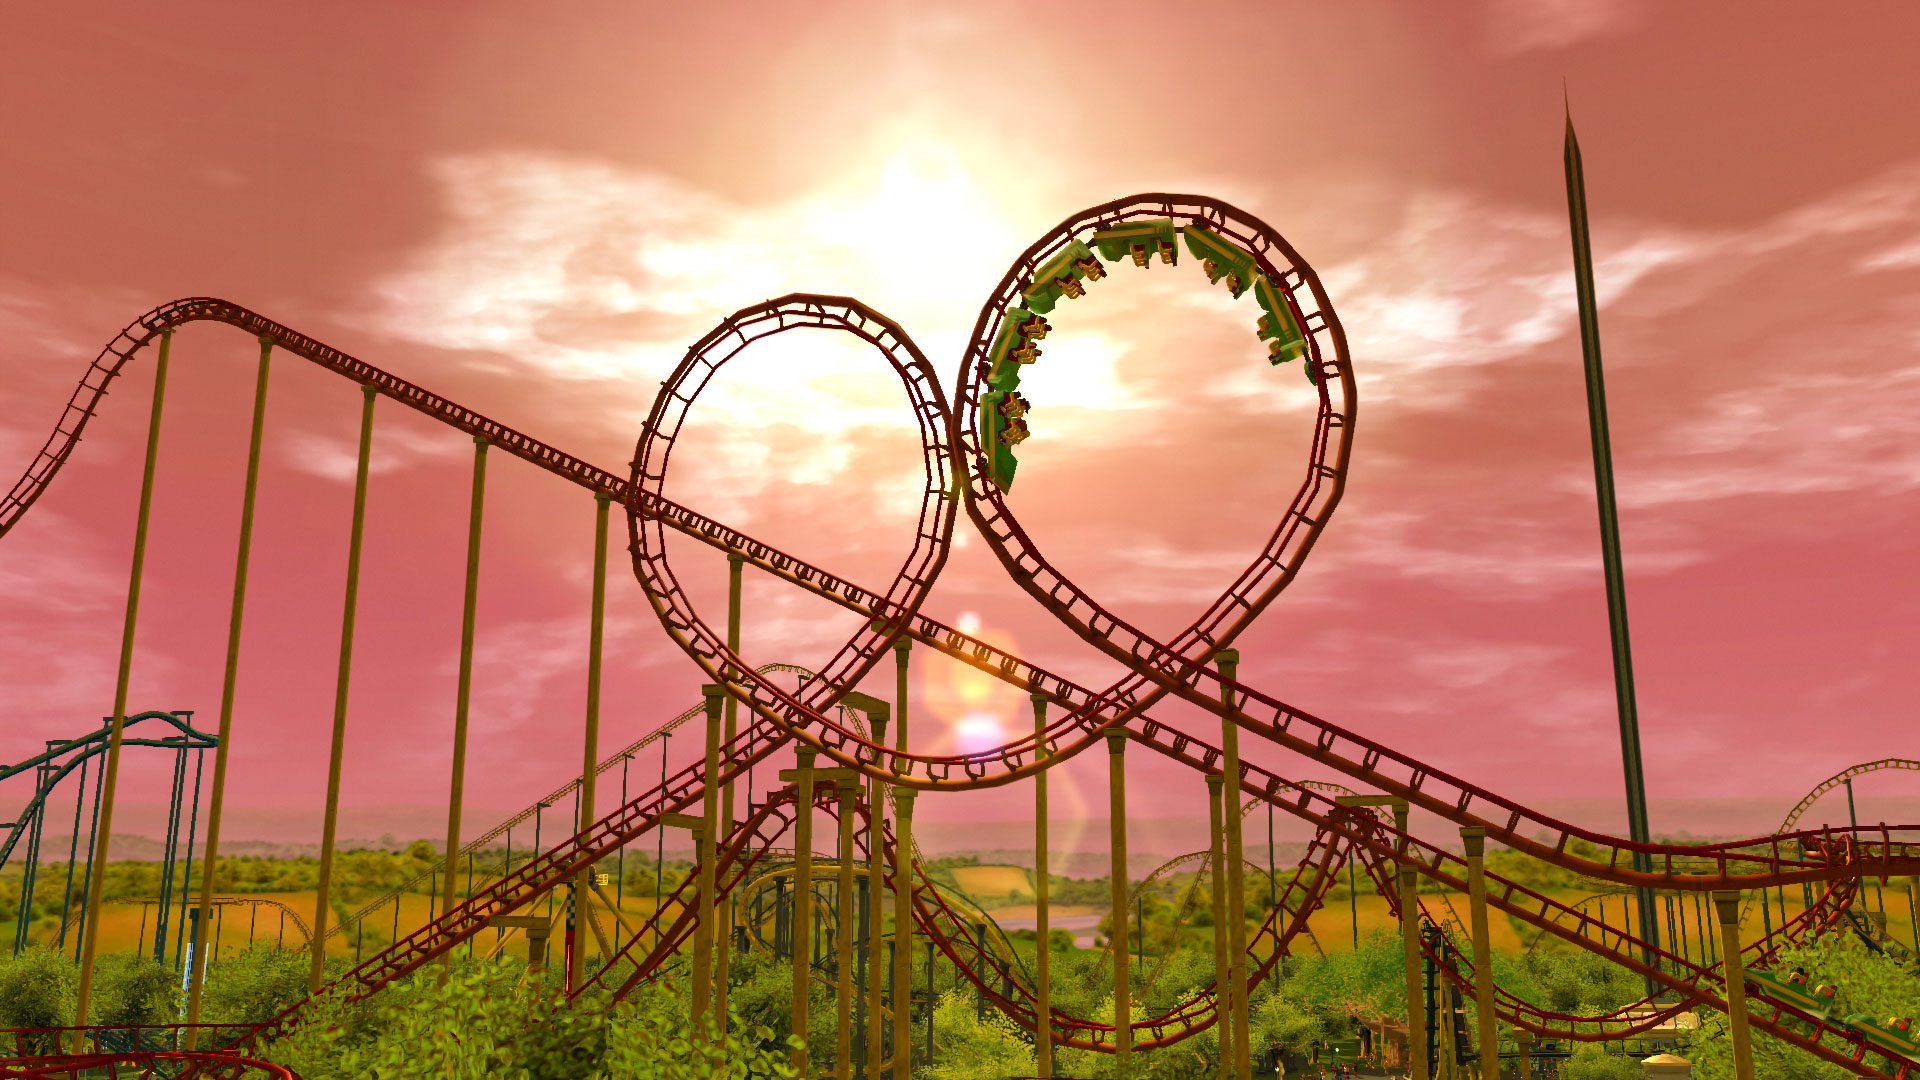 rollercoaster tycoon 3 switch